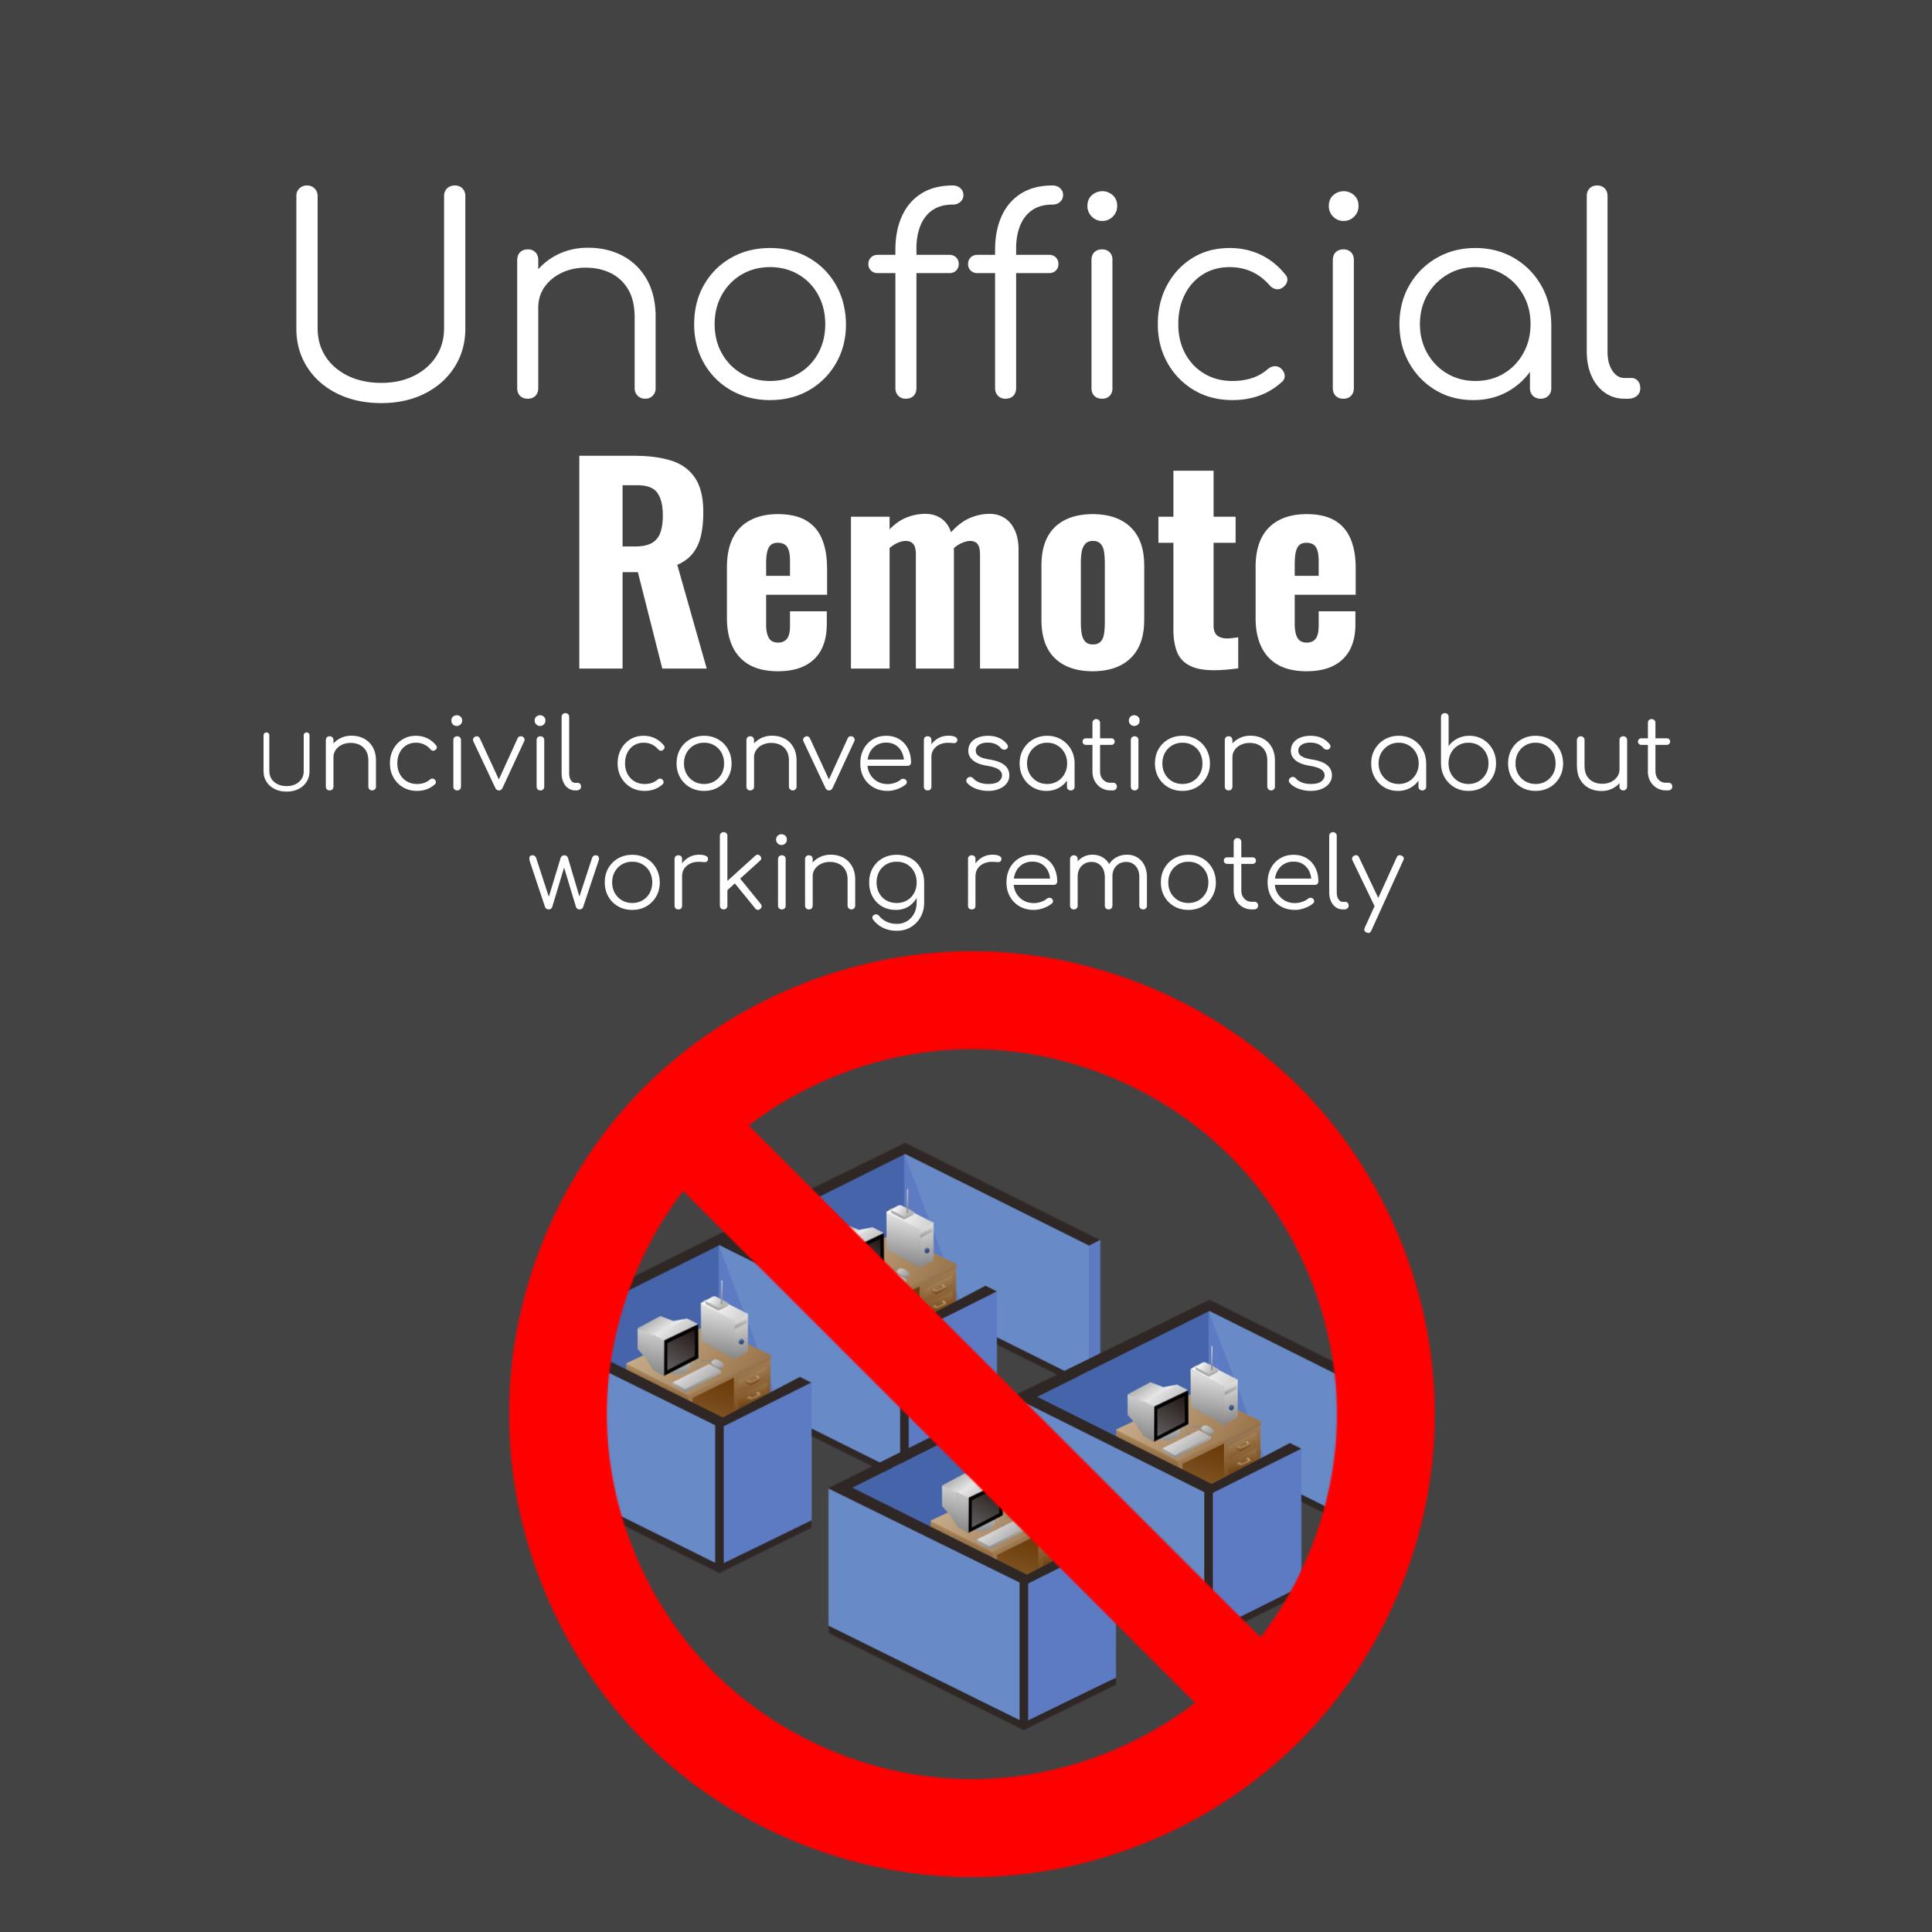 Next Level Remote: A Checklist for RV Life and Working Remotely (Part 2)